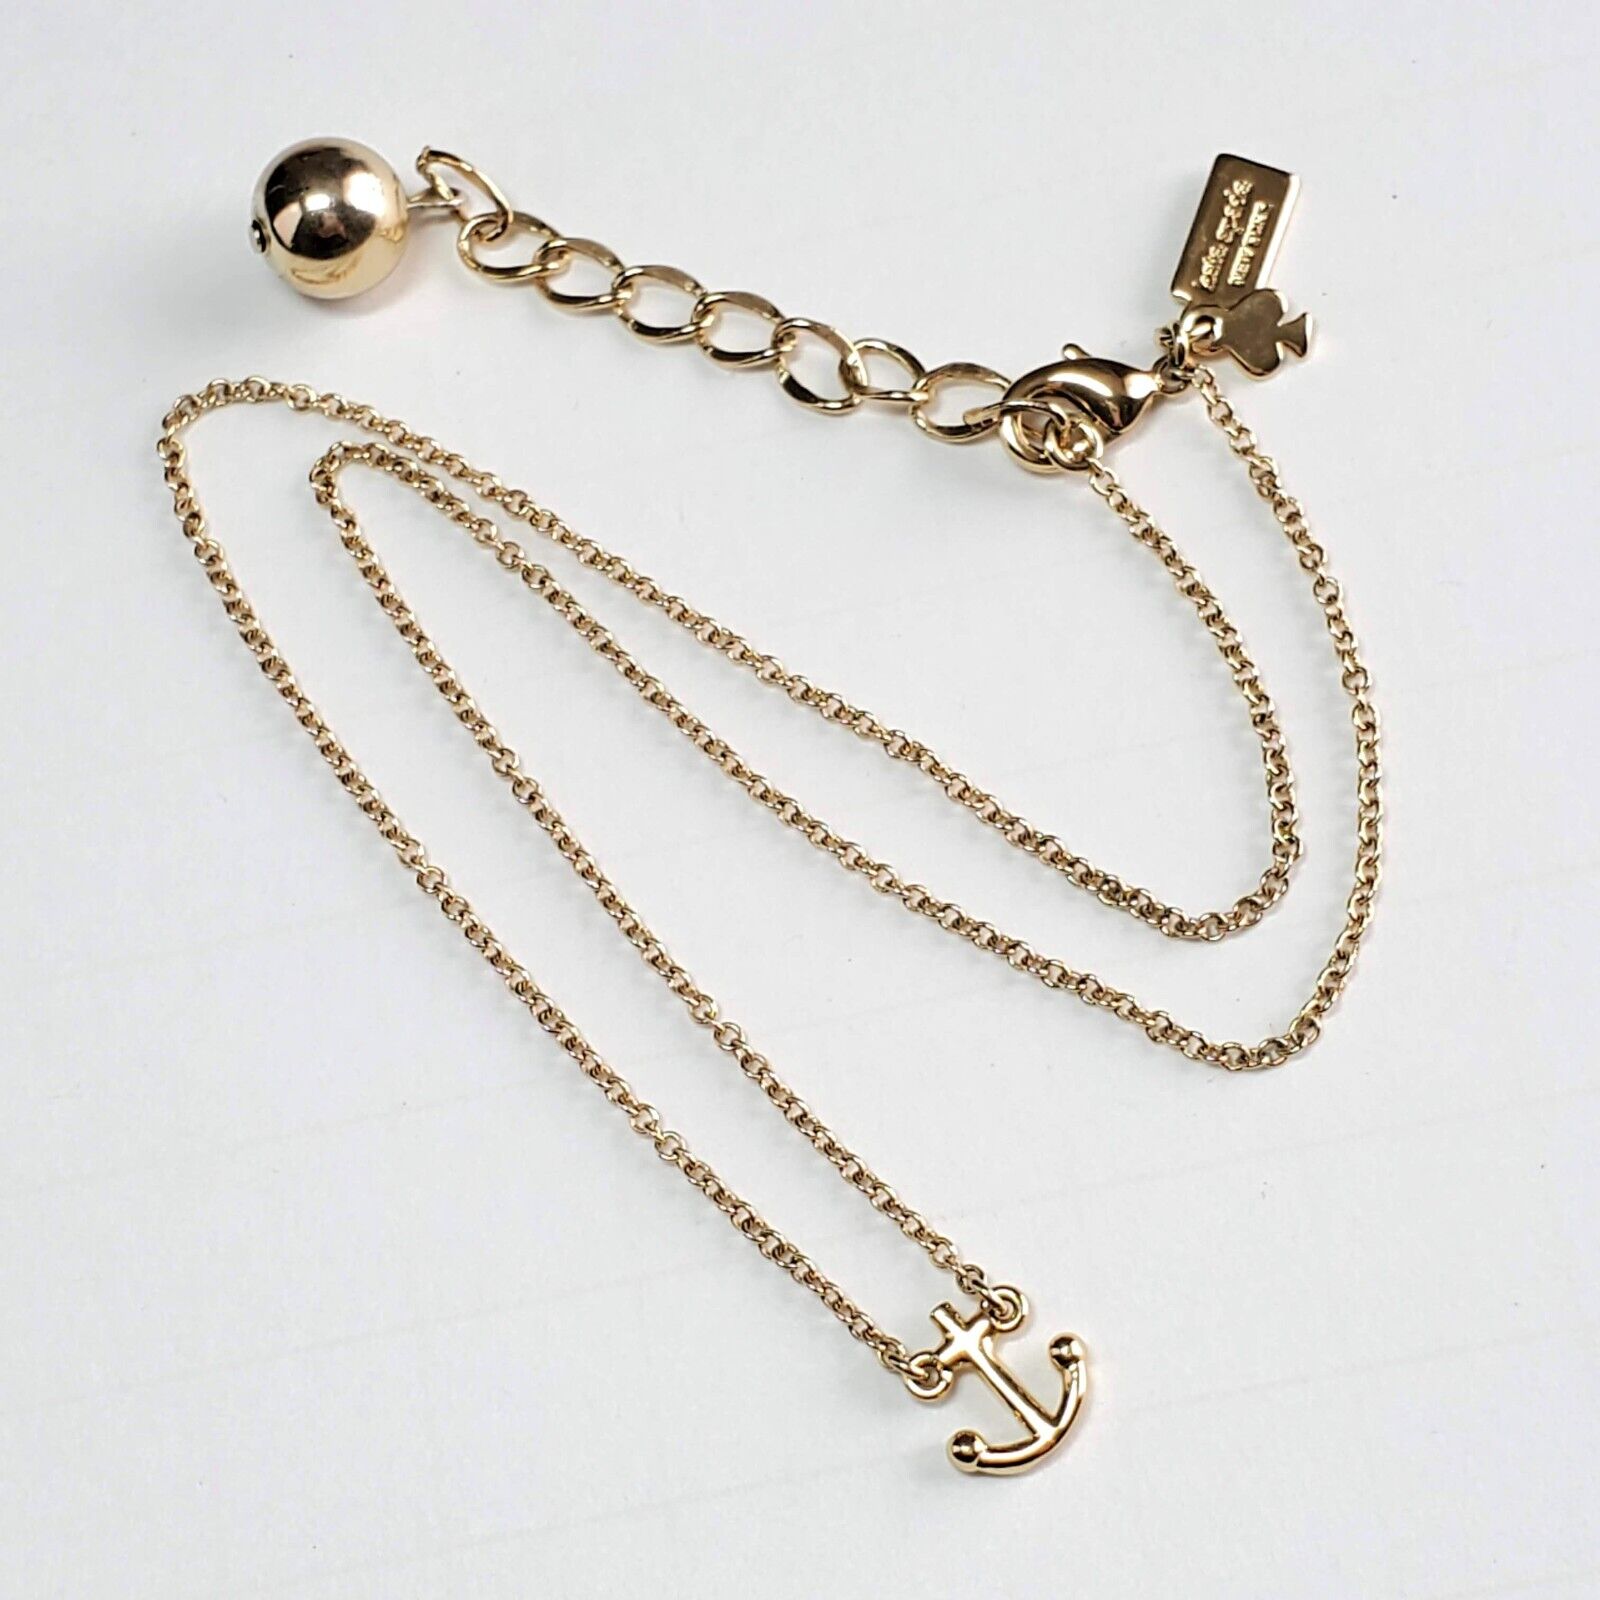 KATE SPADE Gold Plated Mini Anchor Necklace | eBay